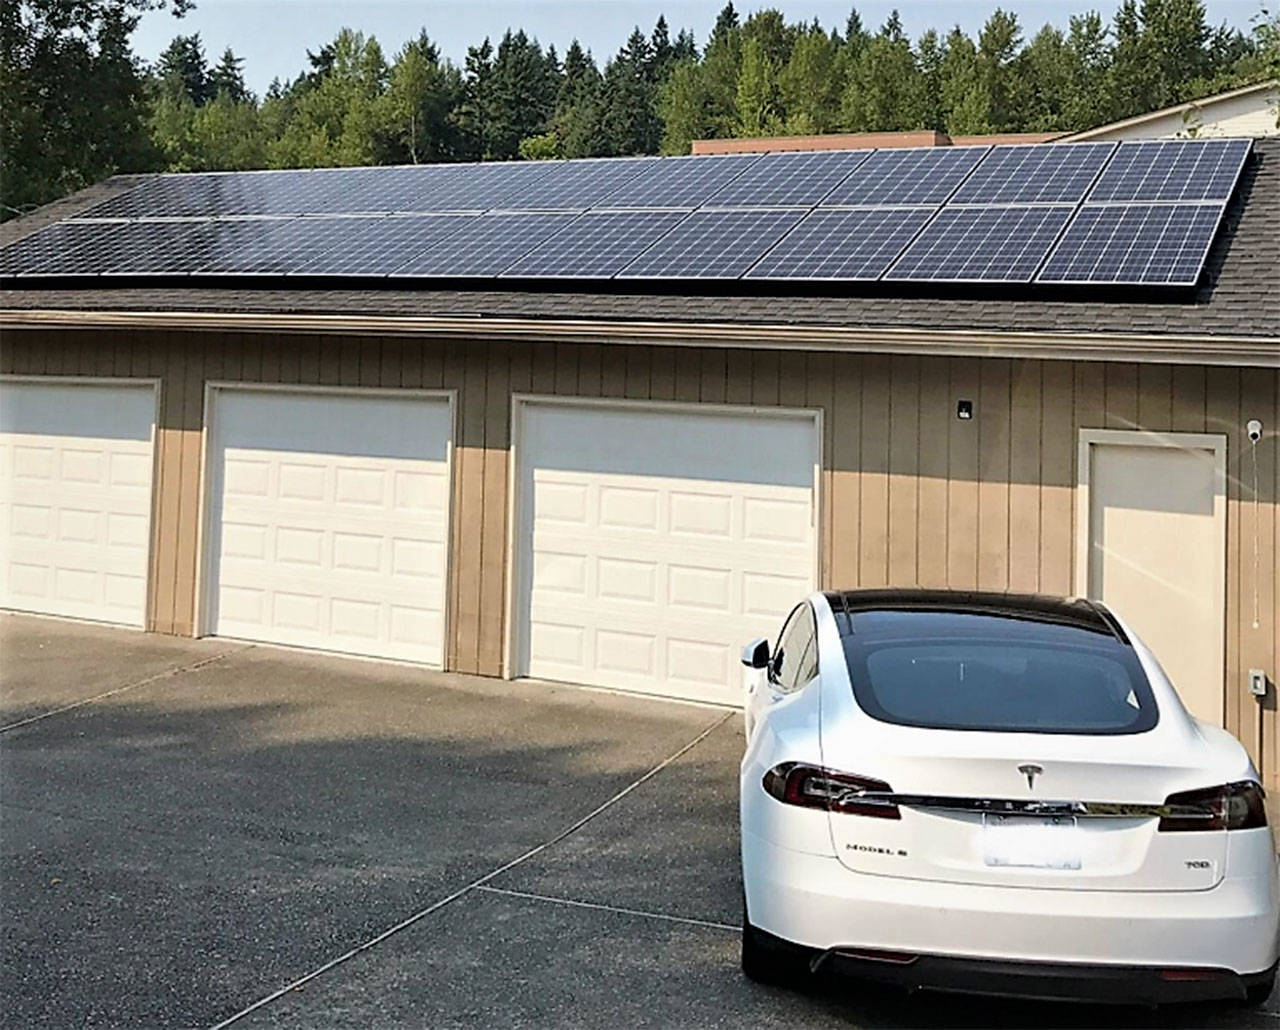 This new Solarize installation on the Island is designed to recharge electric vehicles. Photo courtesy of the city of Mercer Island